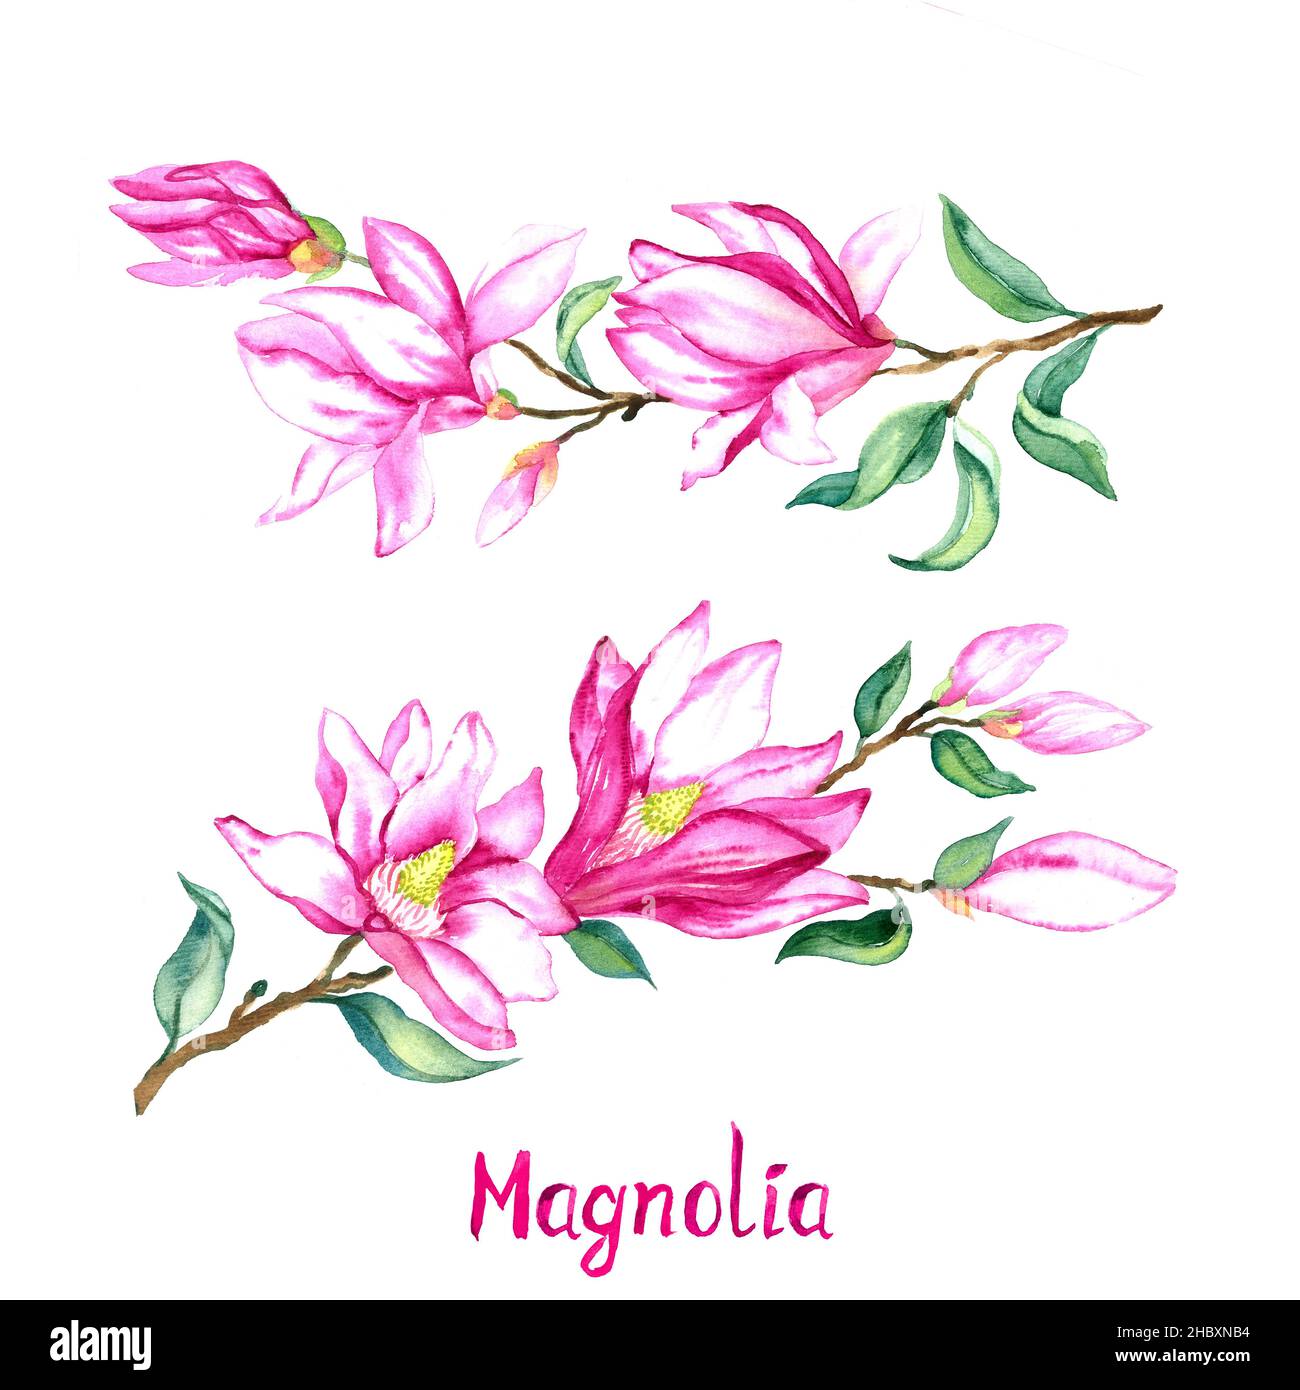 Magnolia twig with pink-purple flowers isolated on white hand painted watercolor illustration with handwritten inscription Stock Photo